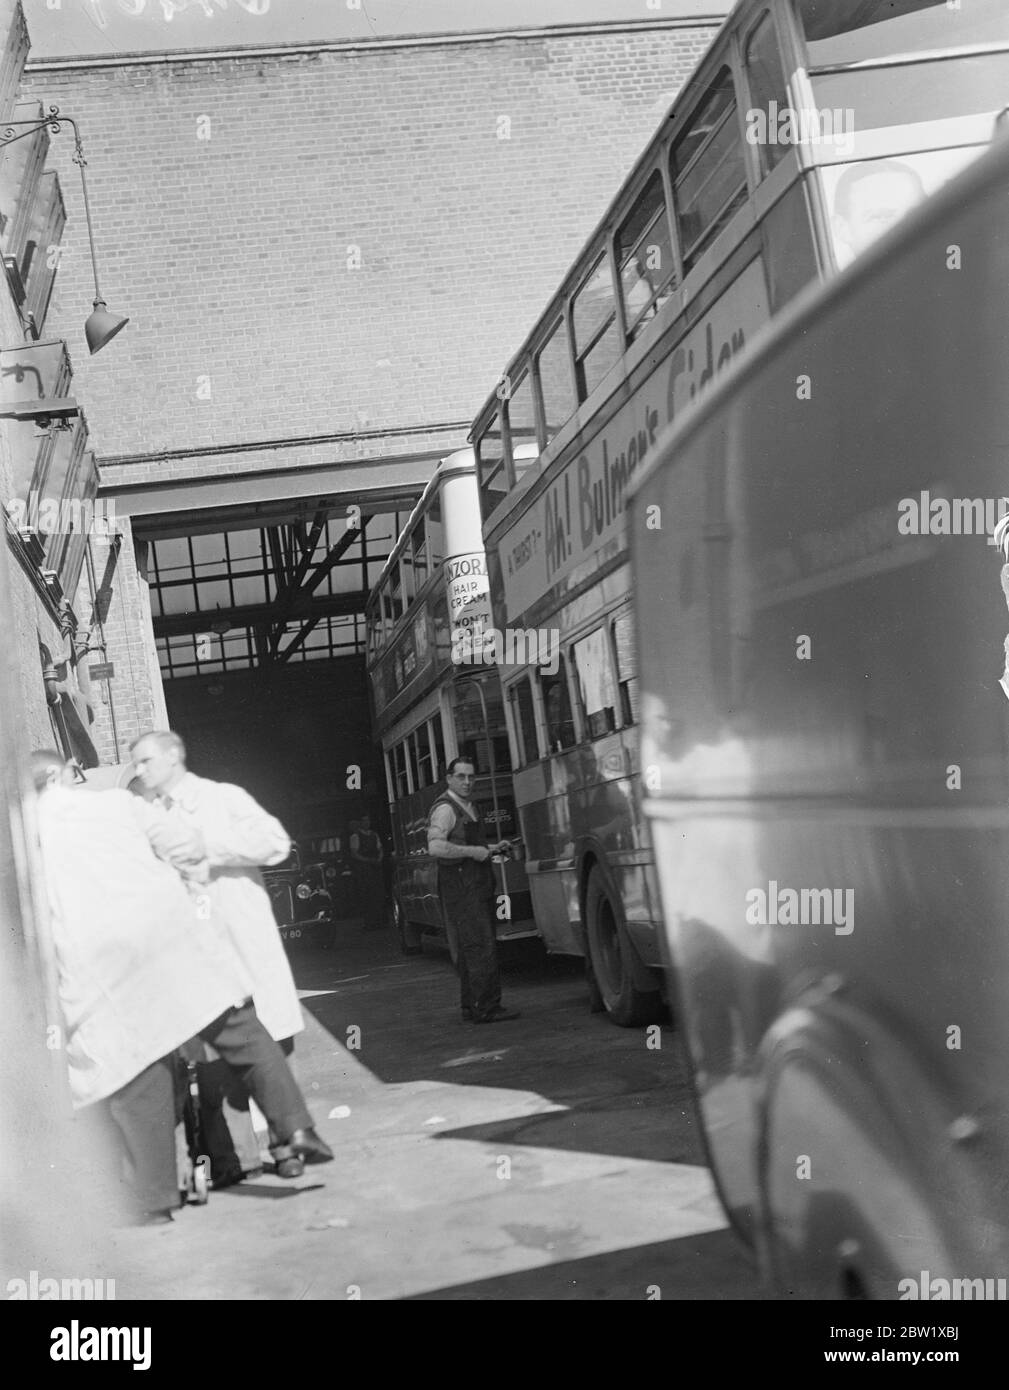 London's buses prepared for return to work. London's thousands of buses, idle for a month, are being made ready for the return to work (Friday) after the strike. Photo shows, varnishing a bus at Camberwell garage. 27 May 1937 Stock Photo